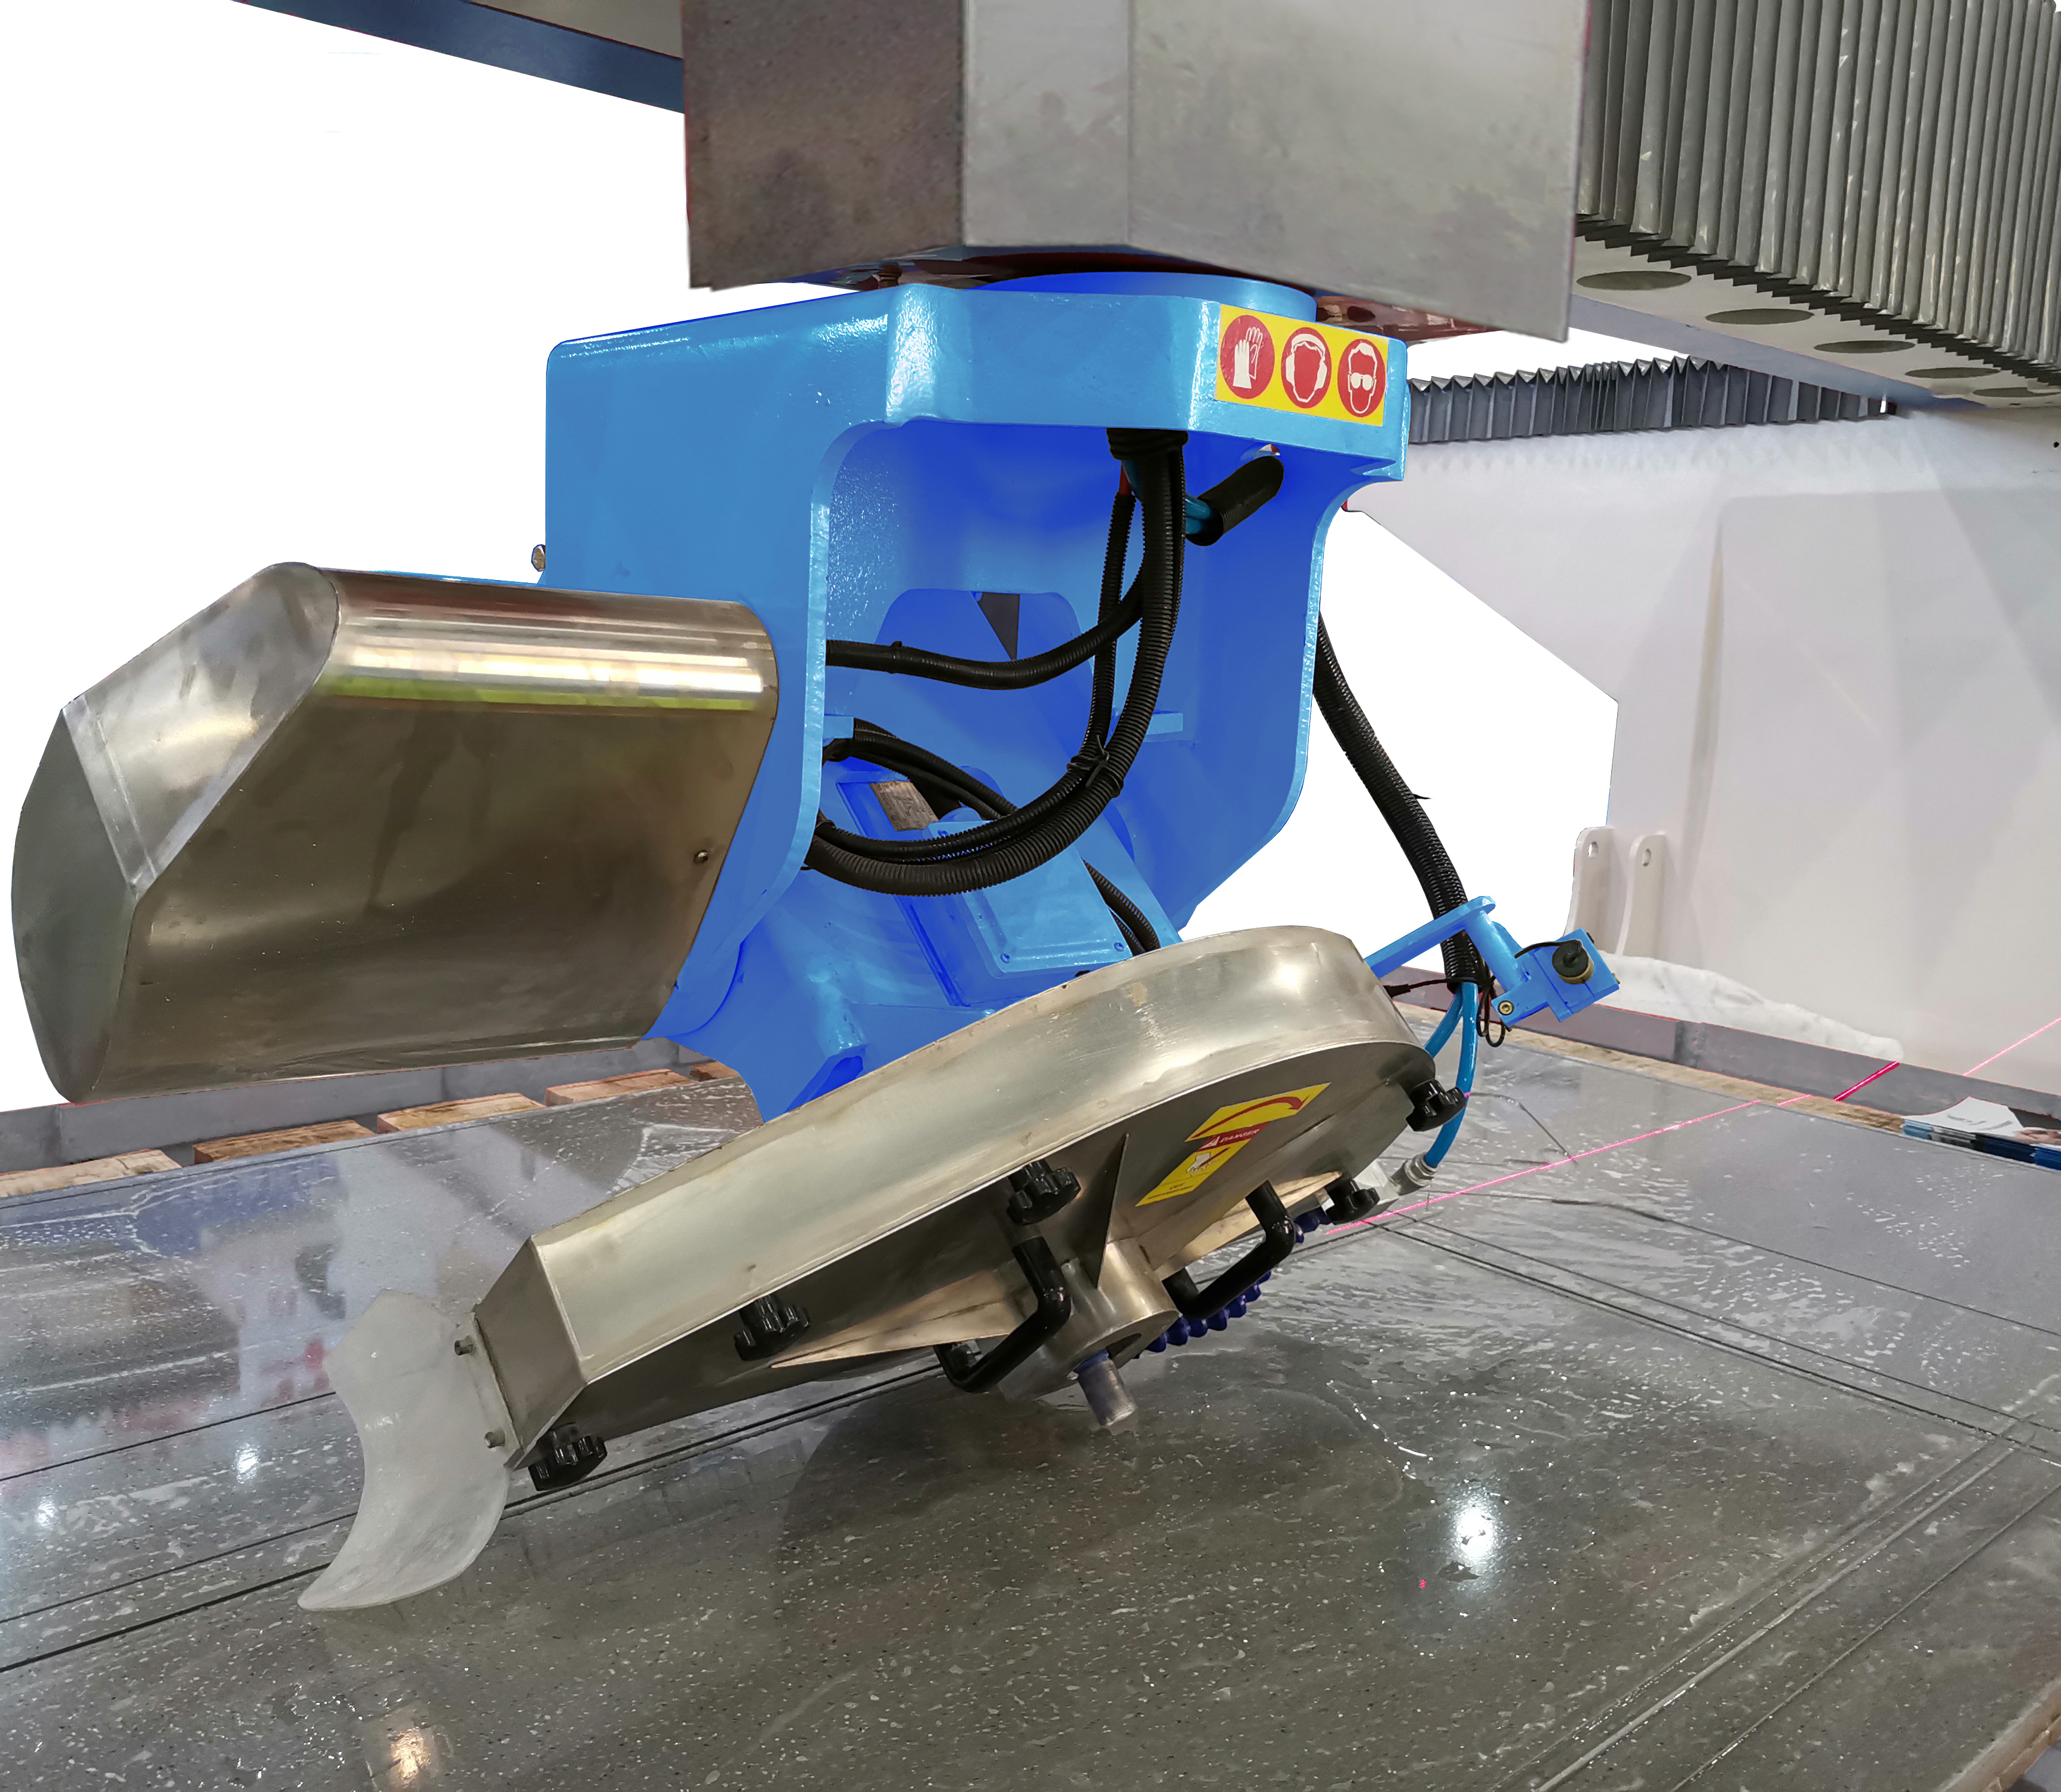 HUALONG Stone Machinery 5 Axis CNC Bridge Saw Granite Cutting Machine for Carving Milling Cutting Drilling Countertop HKNC-825 